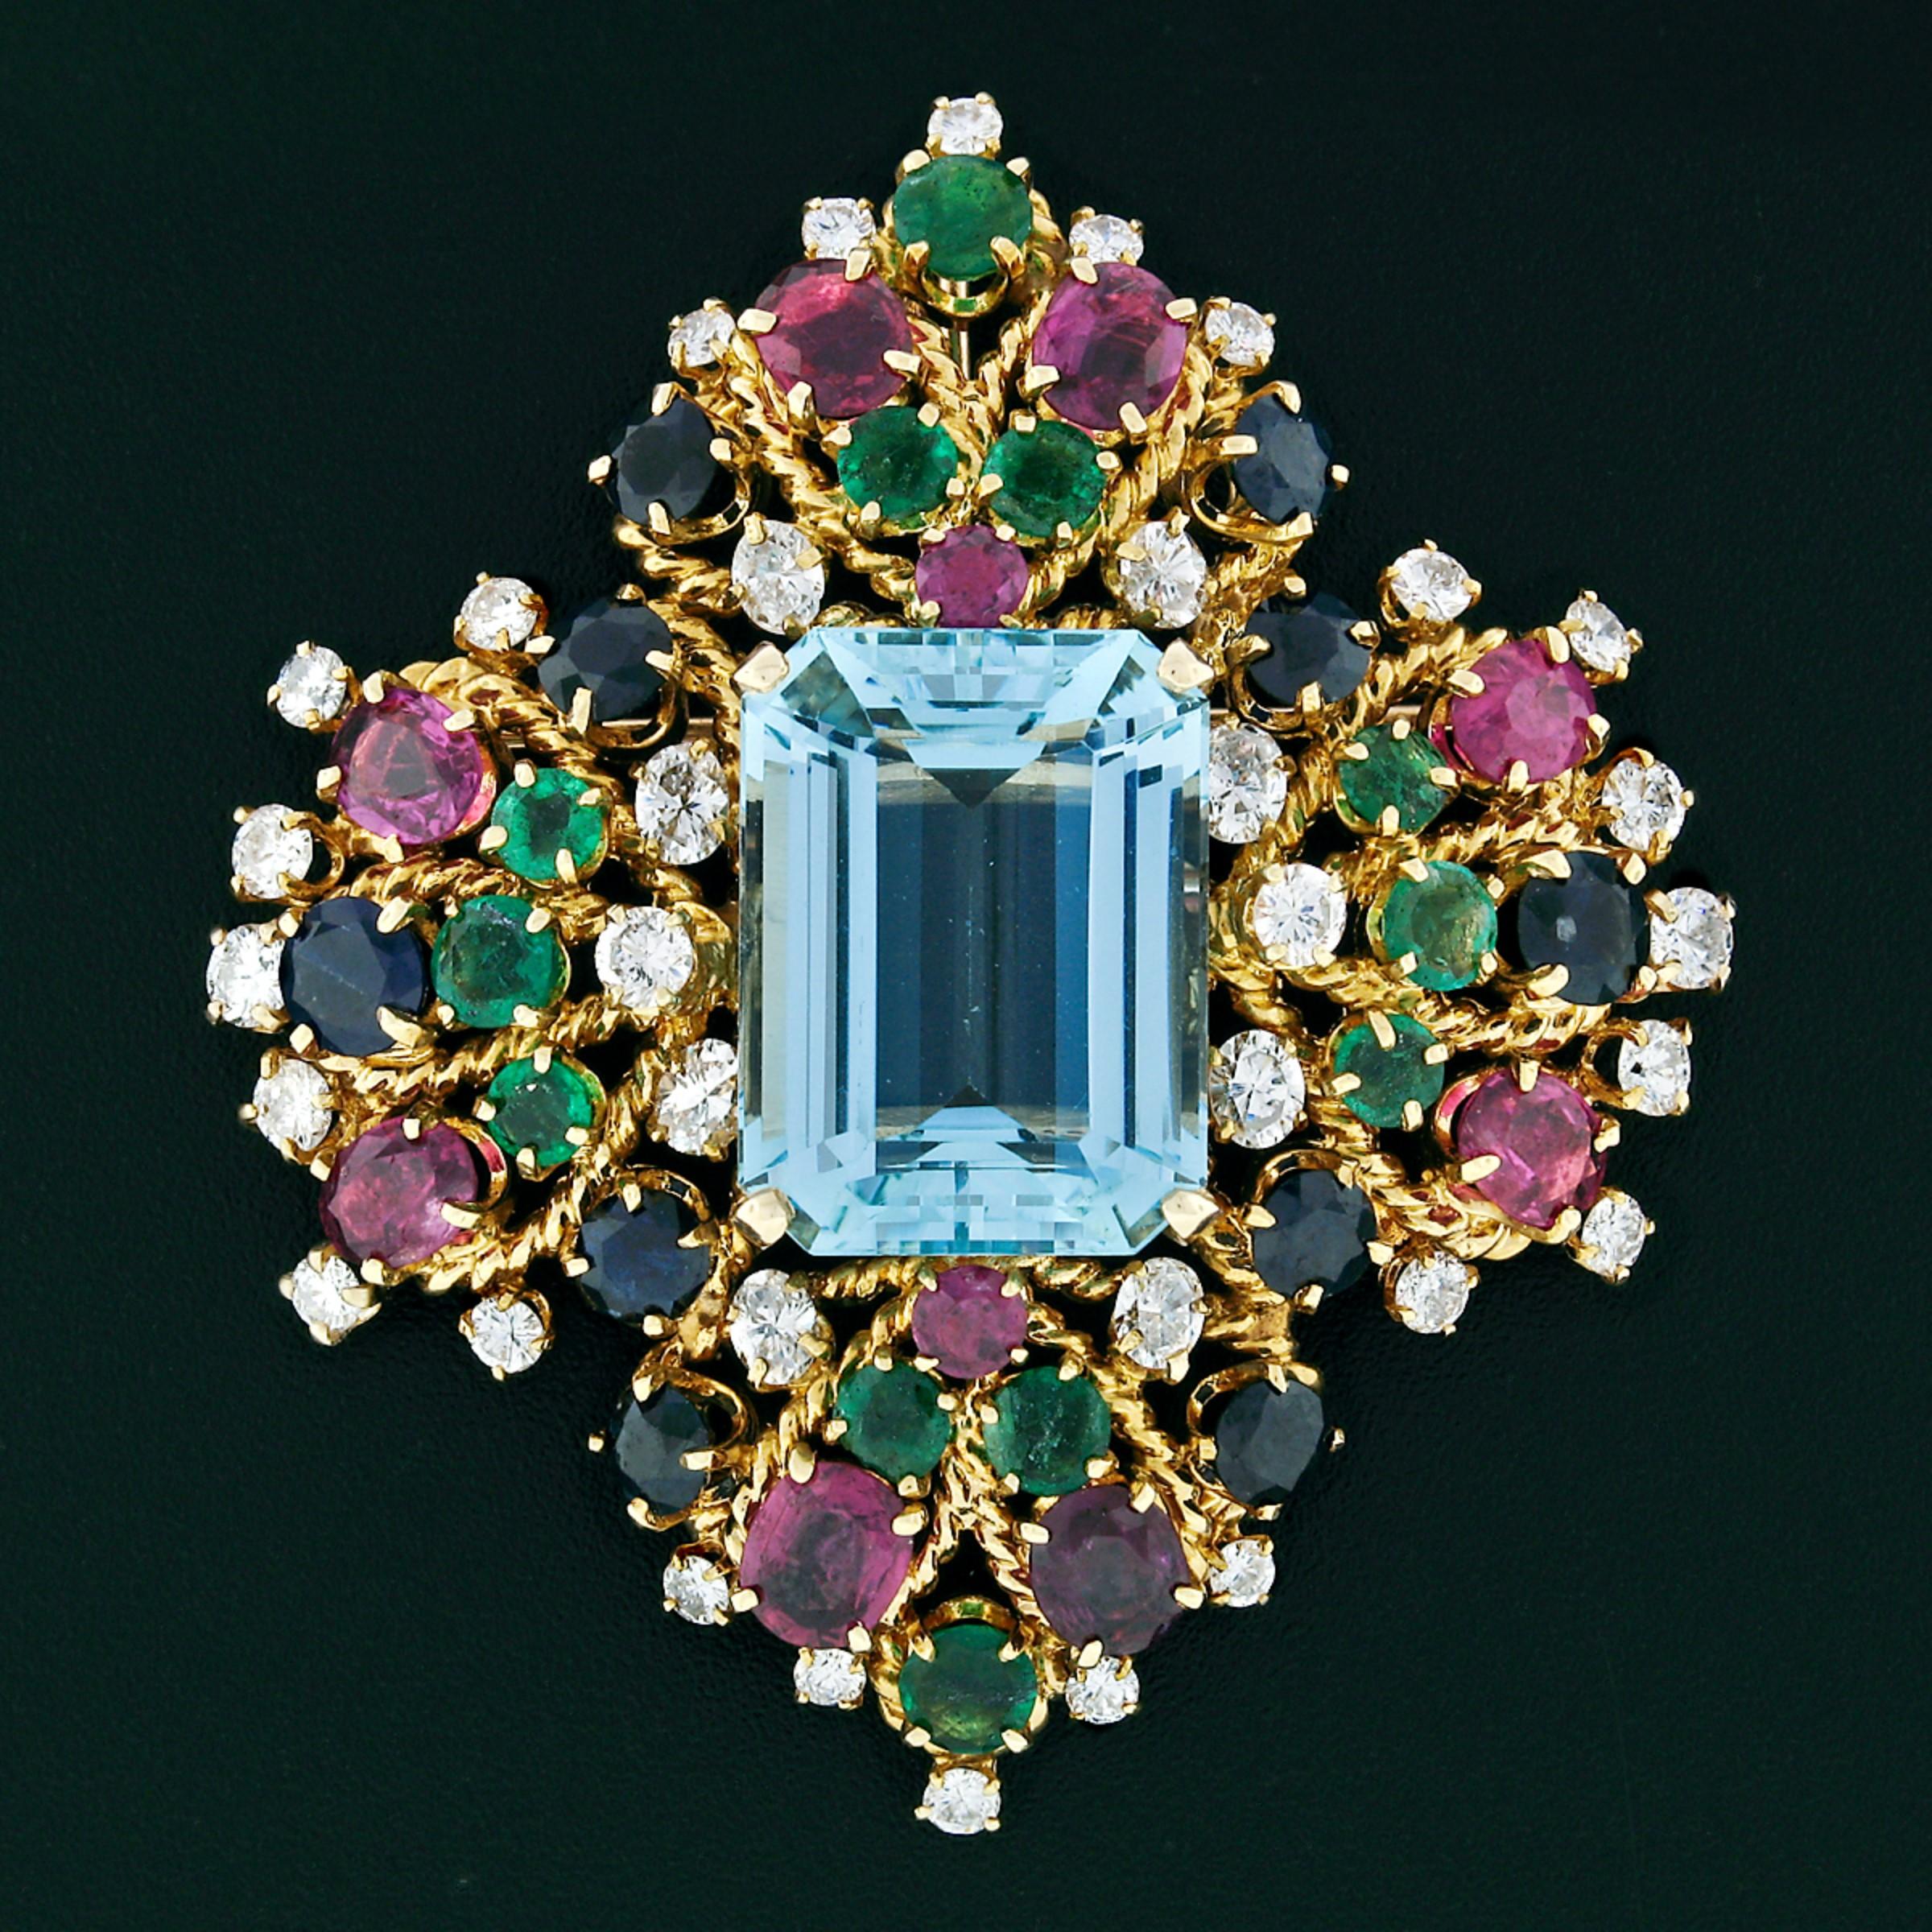 Here we have an absolutely magnificent vintage statement brooch which was hand-crafted from solid 18k yellow gold. This fancy brooch features a gorgeous, GIA certified, large and rich blue aquamarine stone sitting at the center of the brooch. The